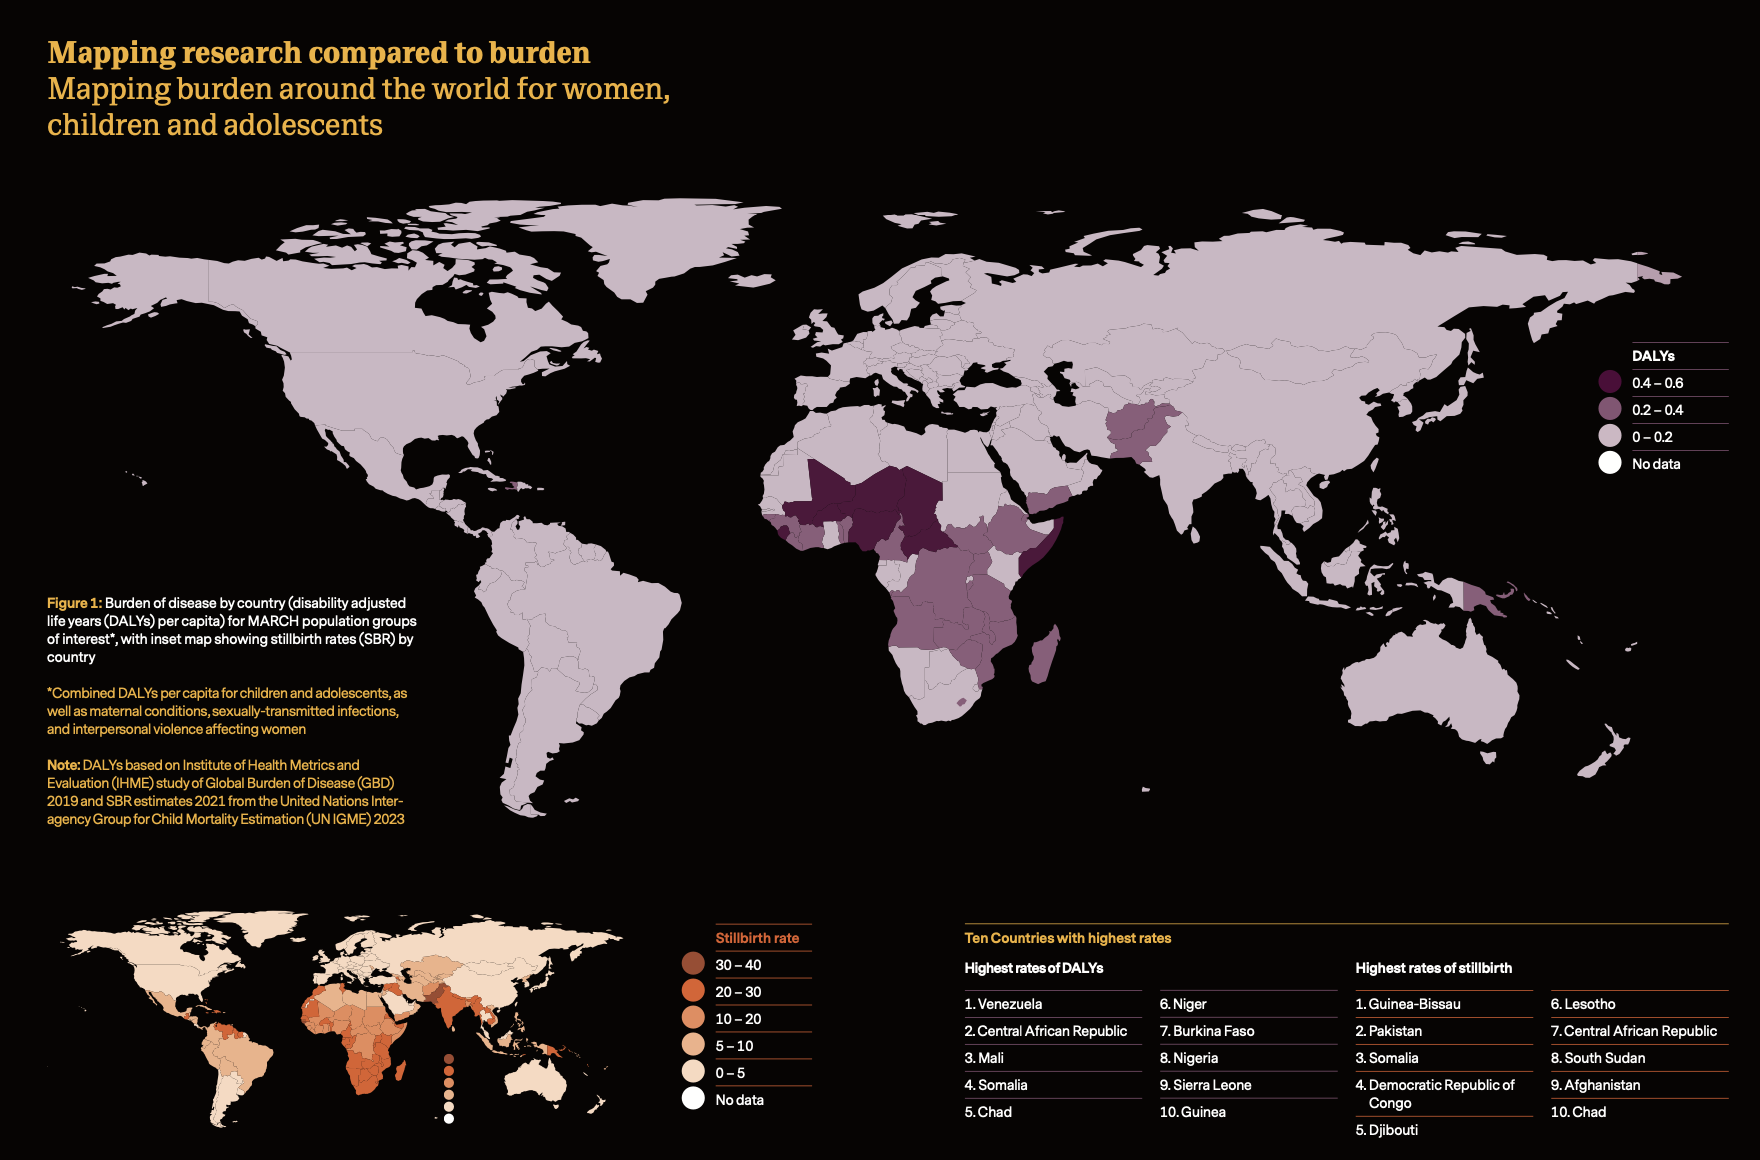 Infographic mapping burden around the world for women, children and adolescents